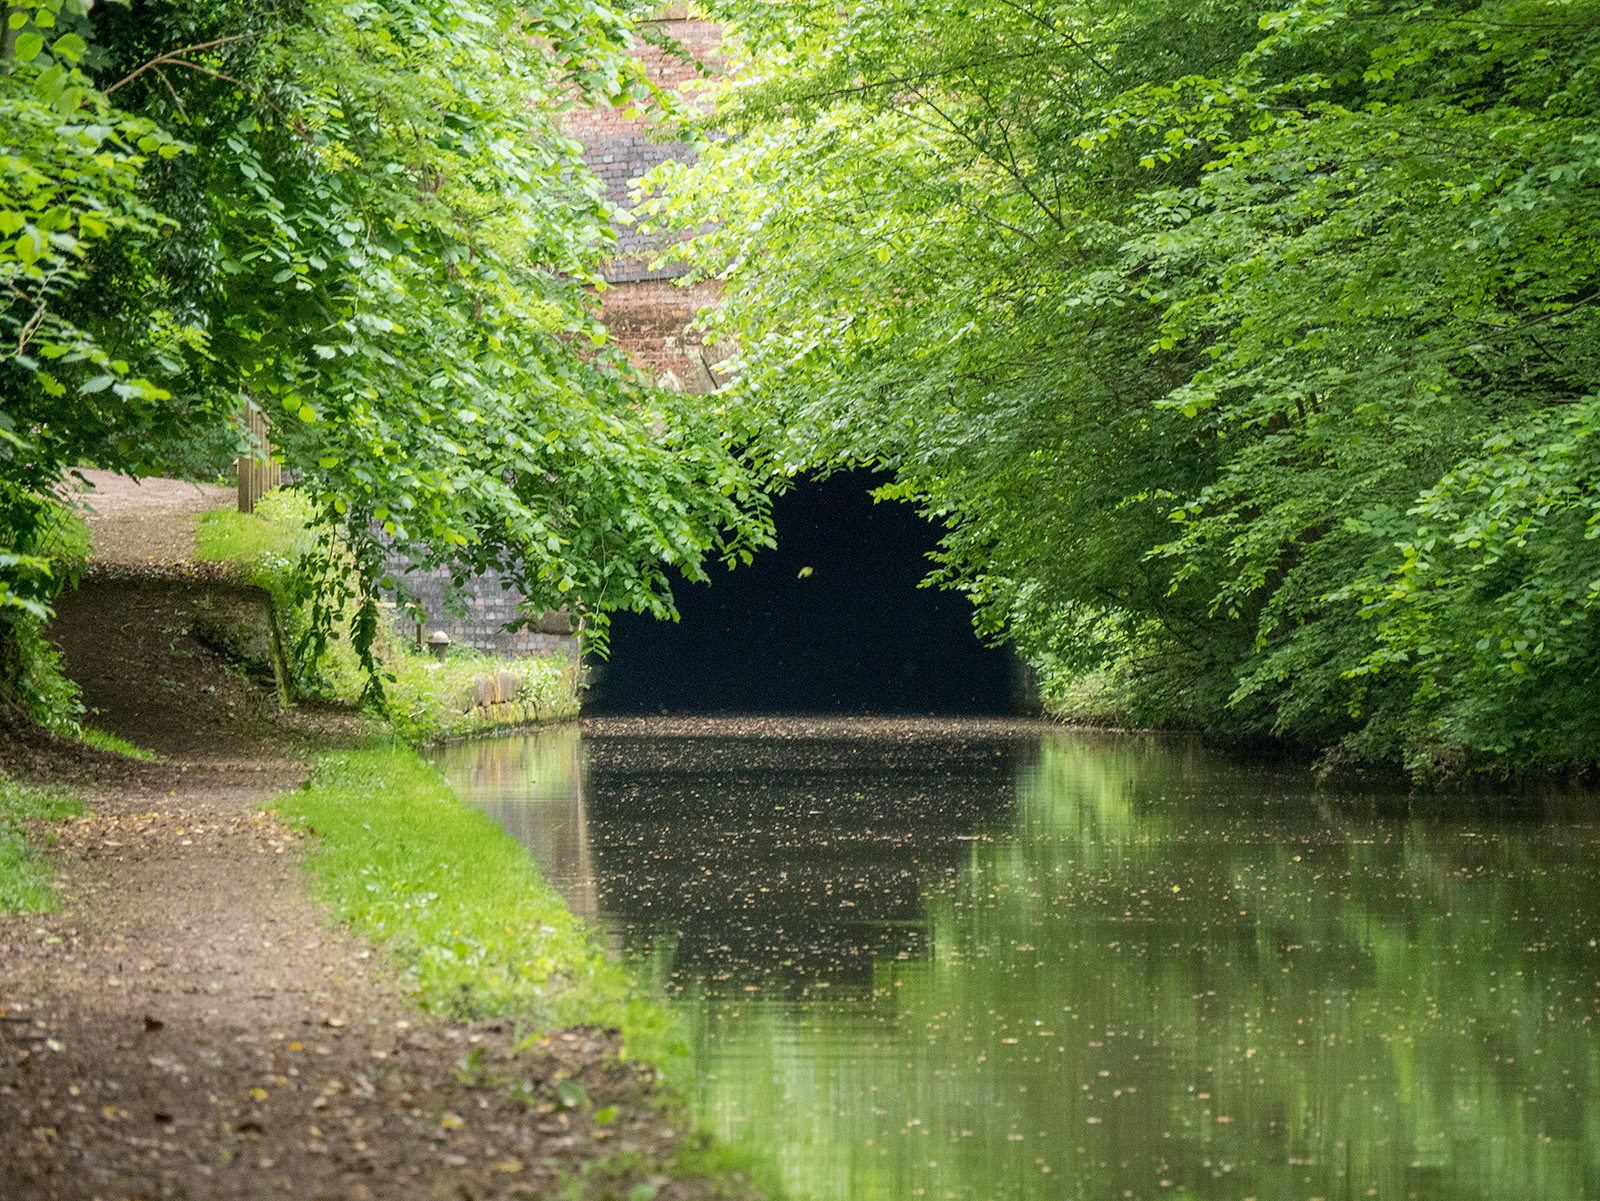 Approaching the eastern entrance to the Braunston tunnel